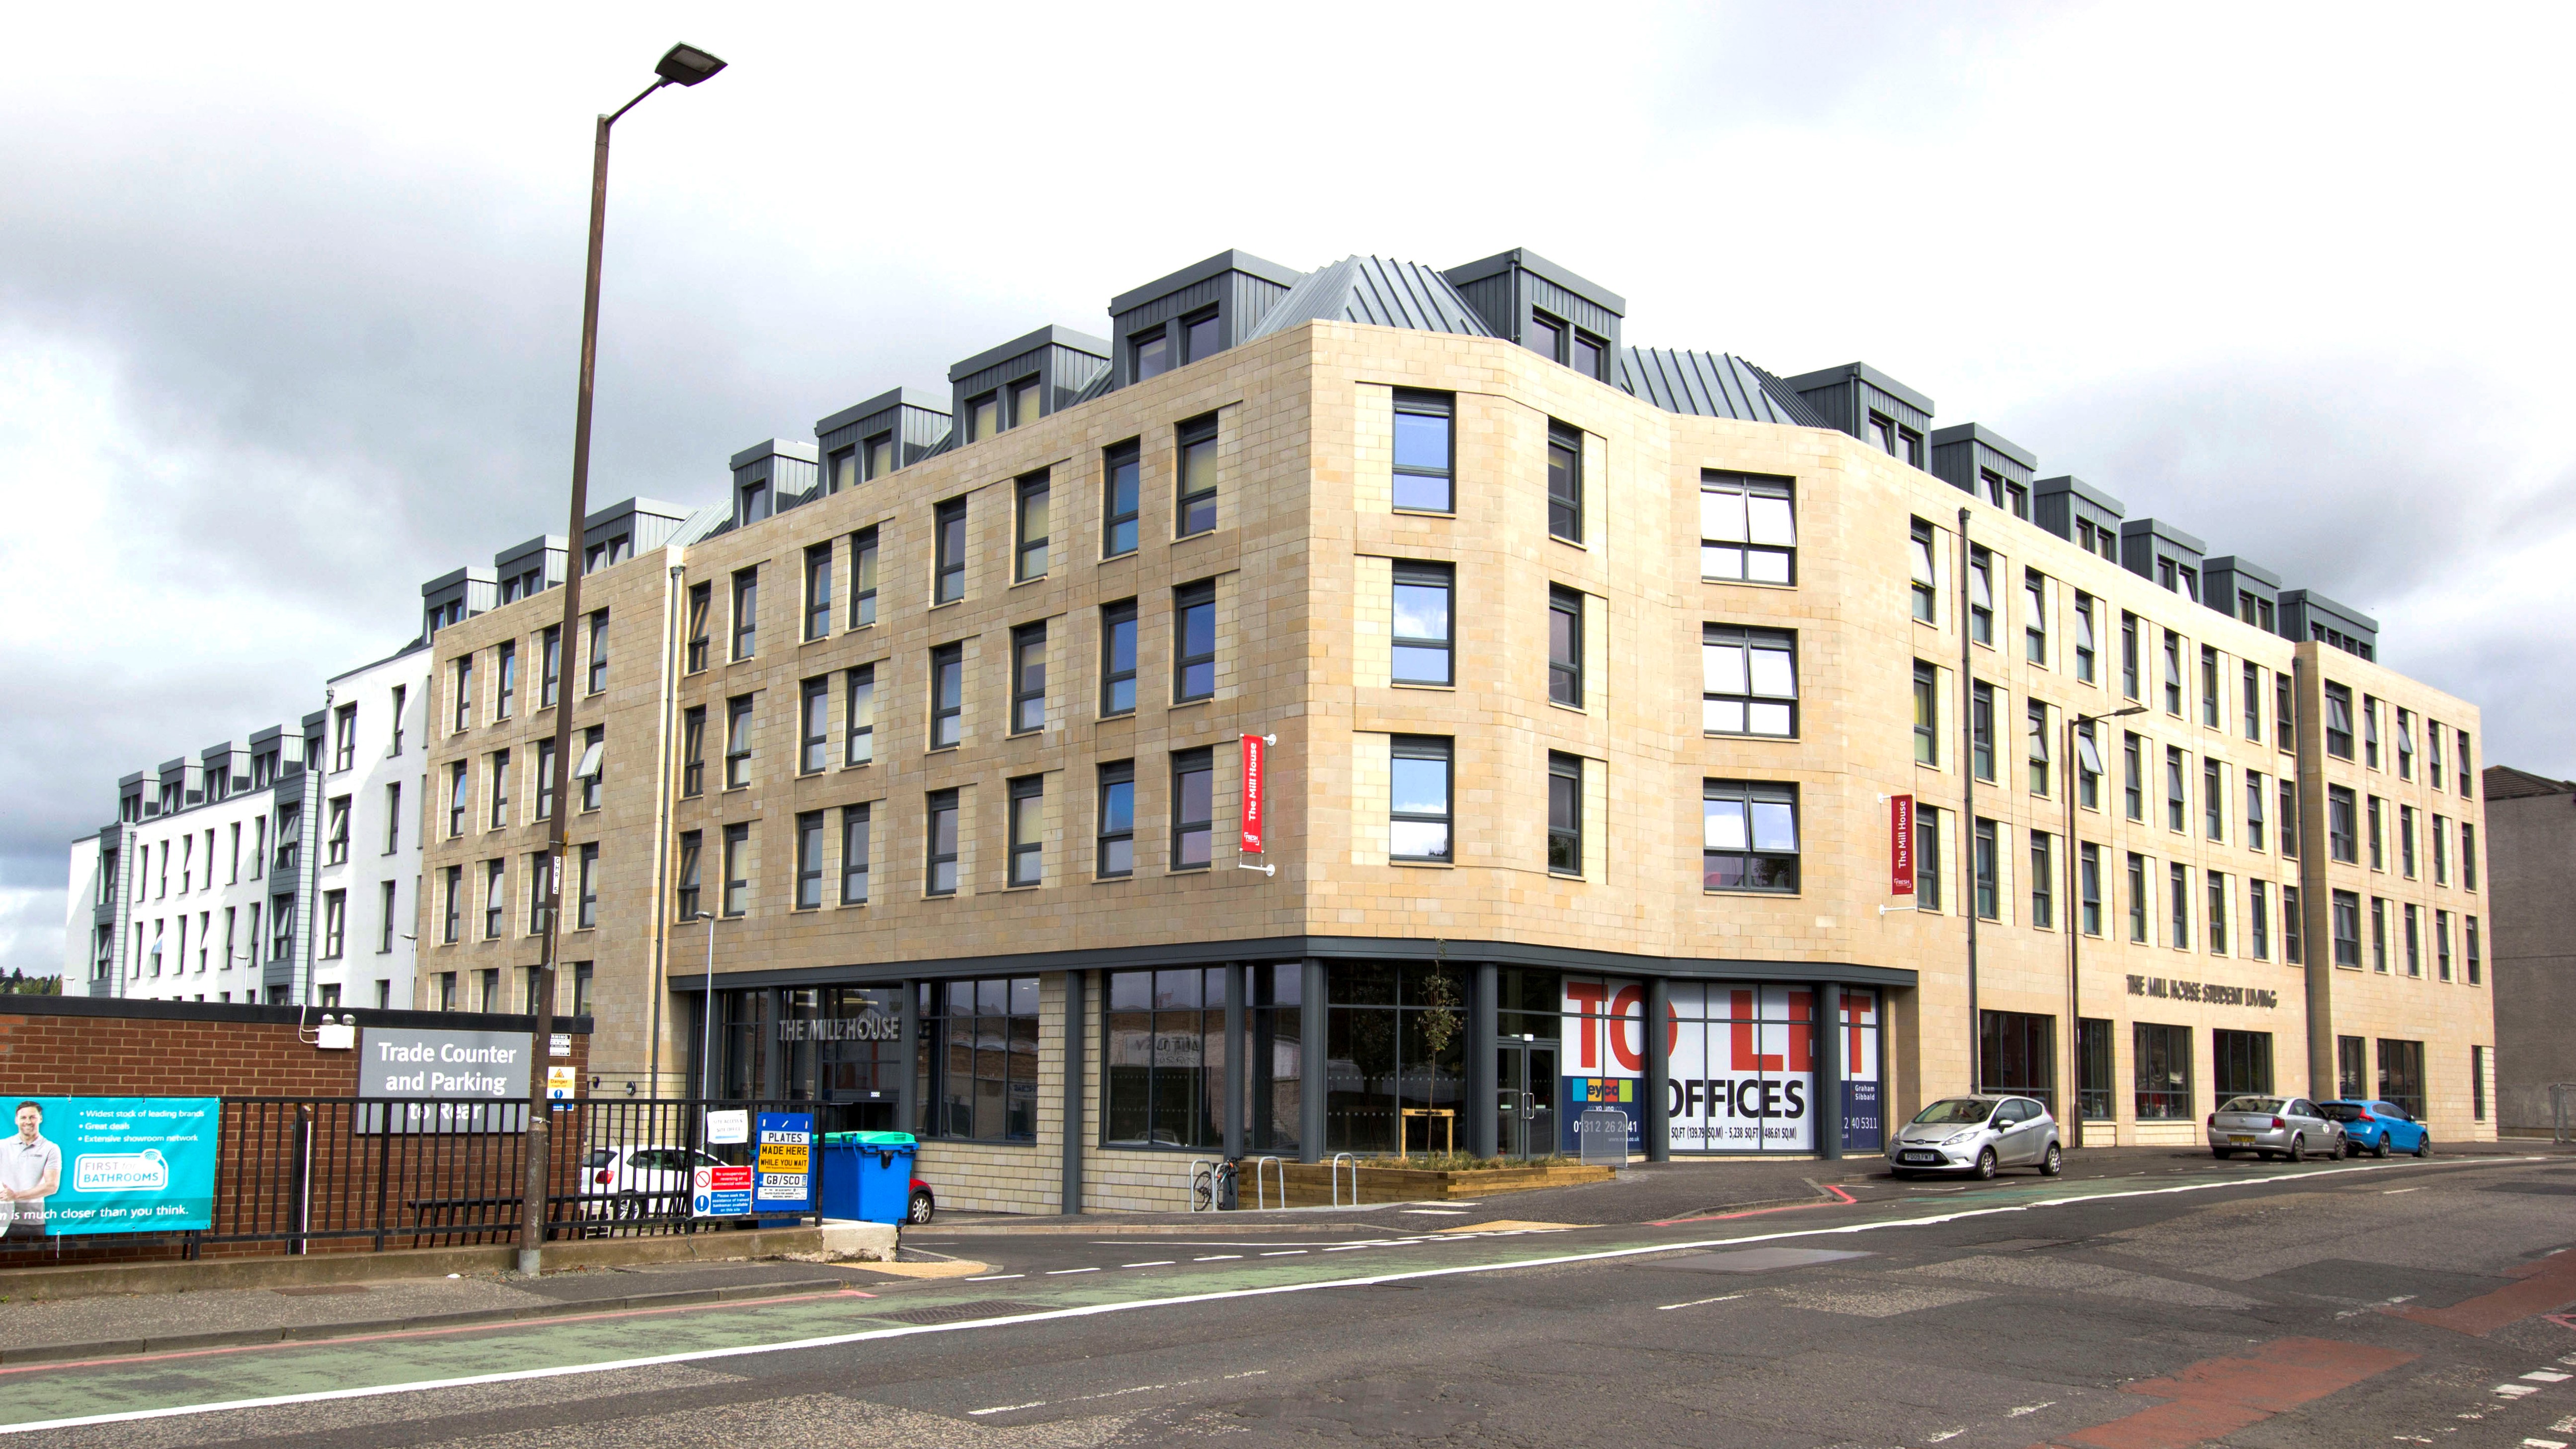 Investment sale of a prime direct let student accommodation asset